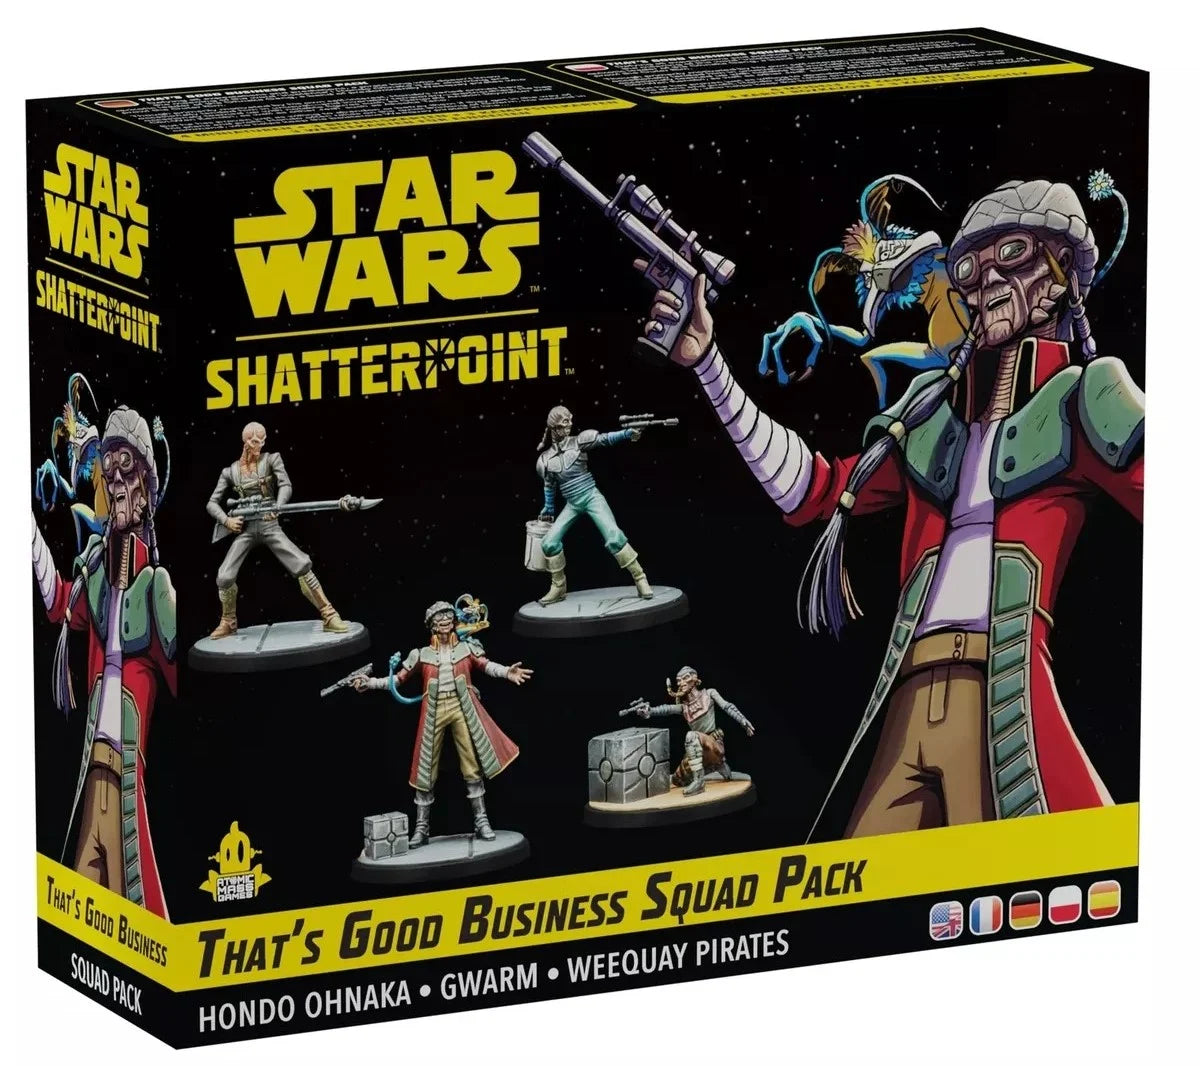 Star Wars Shatterpoint: That's good business squad pack | Multizone: Comics And Games